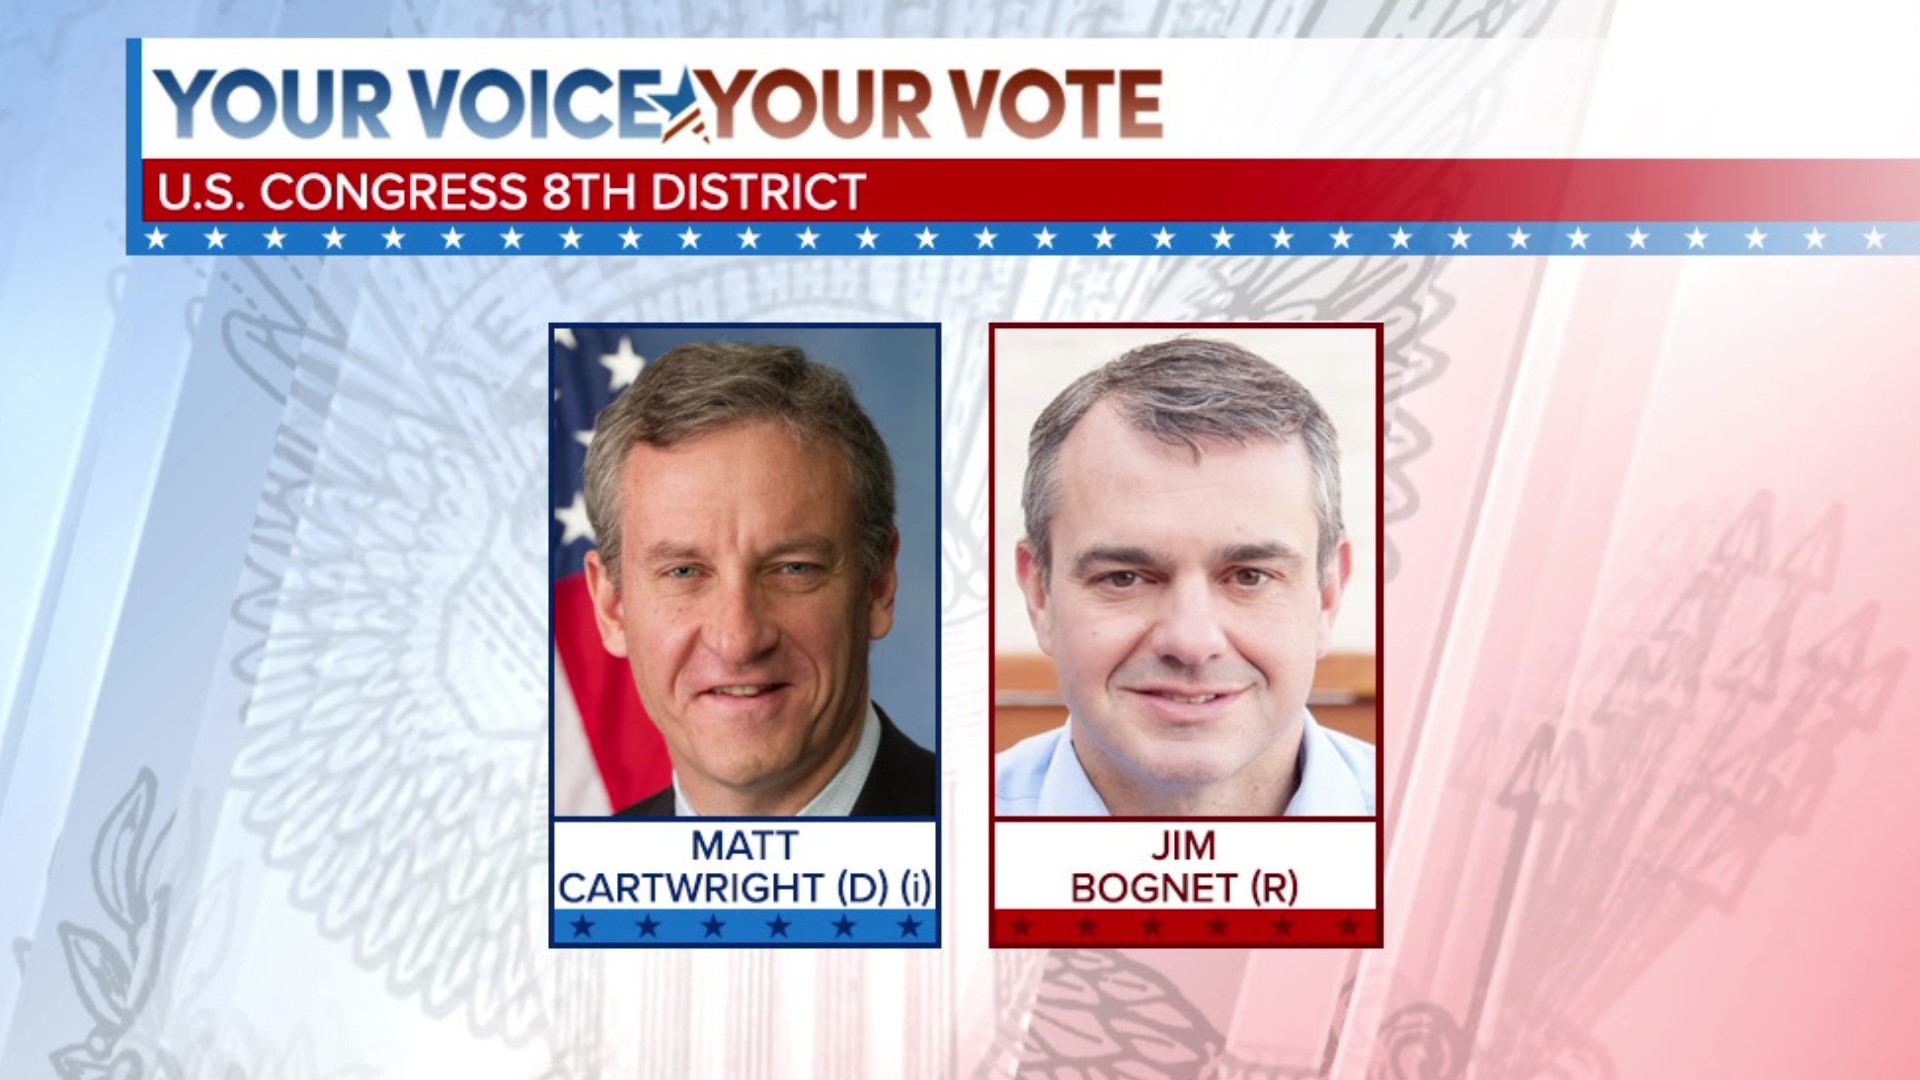 This will be Cartwright's fifth term in the House of Representatives.